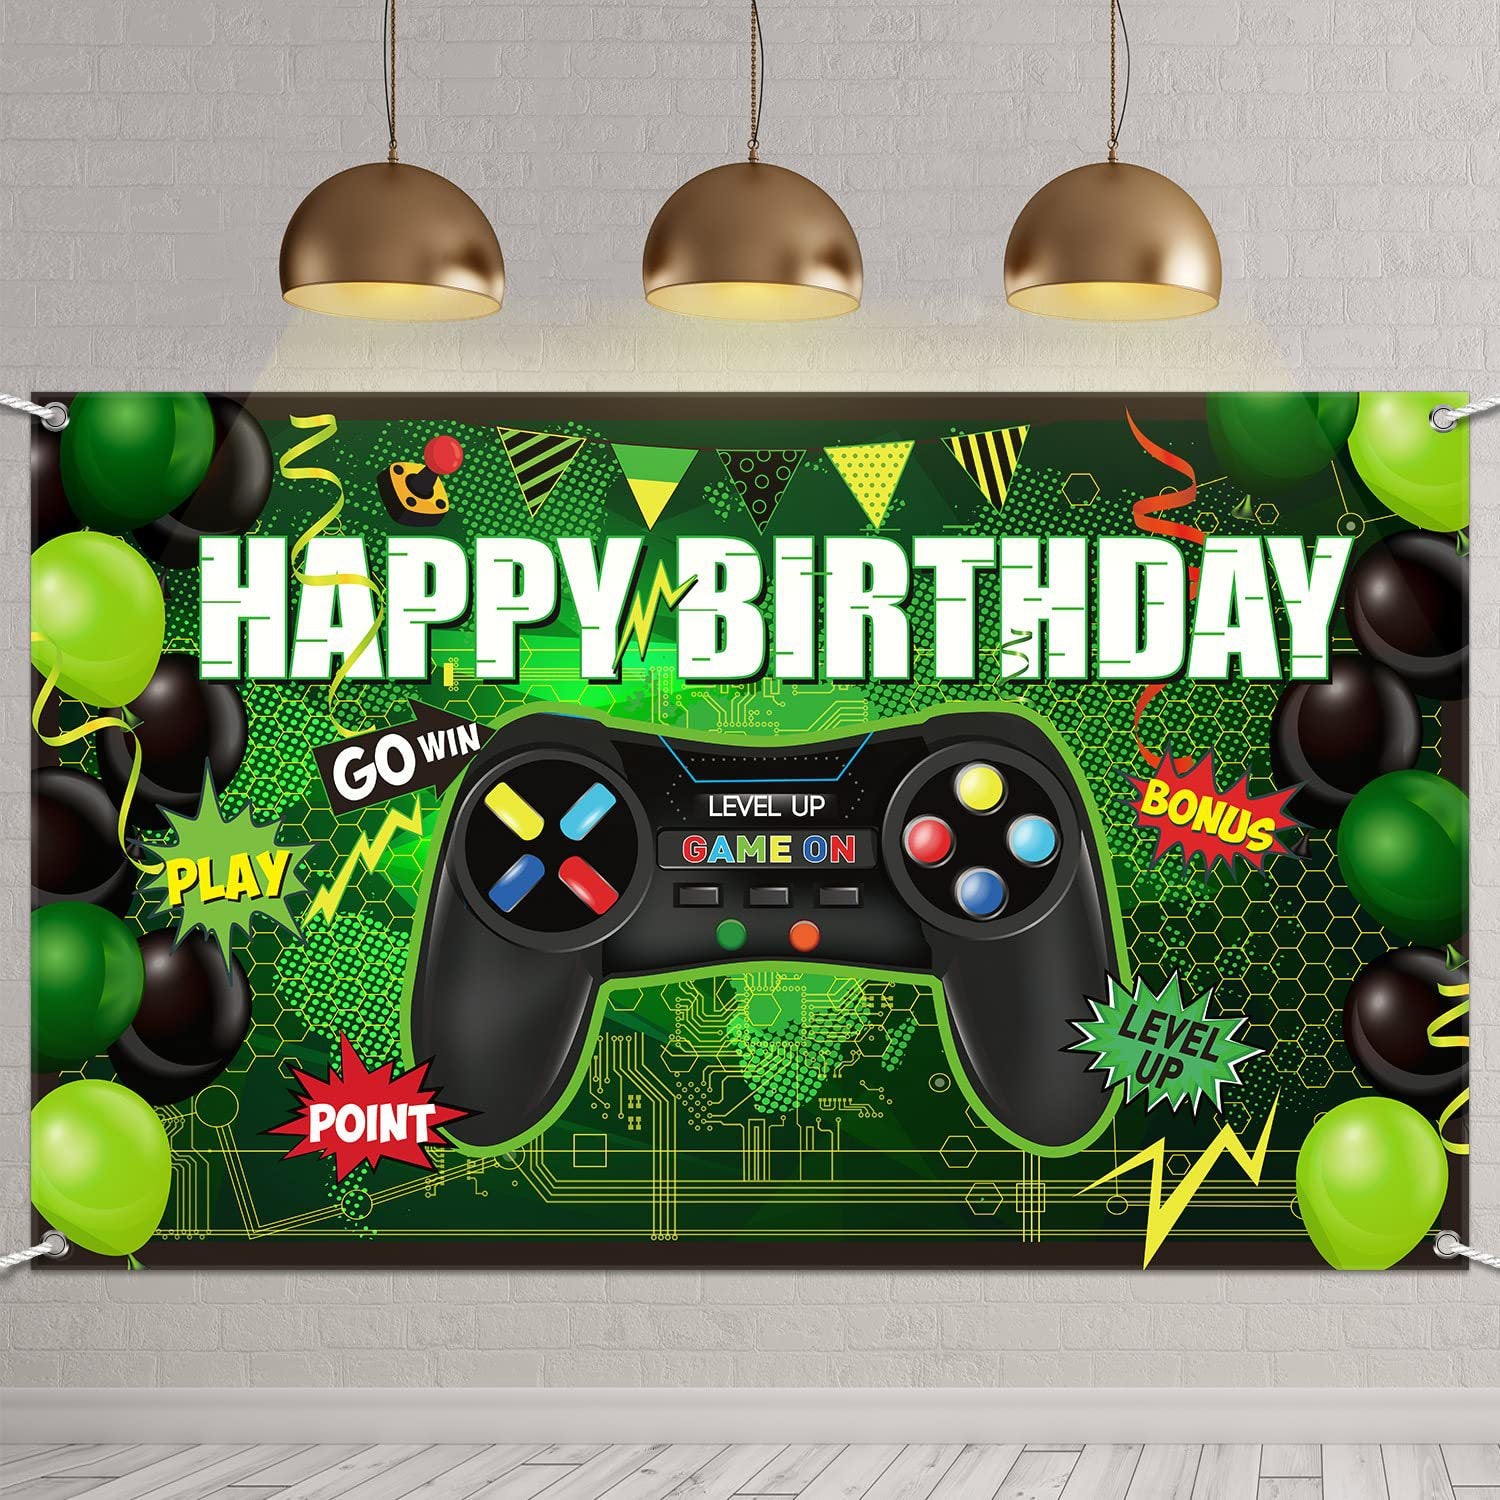 Bulk 10 Pcs Happy Birthday Banners for Game Theme Birthday Party Background Banner Party Supplies Wholesale